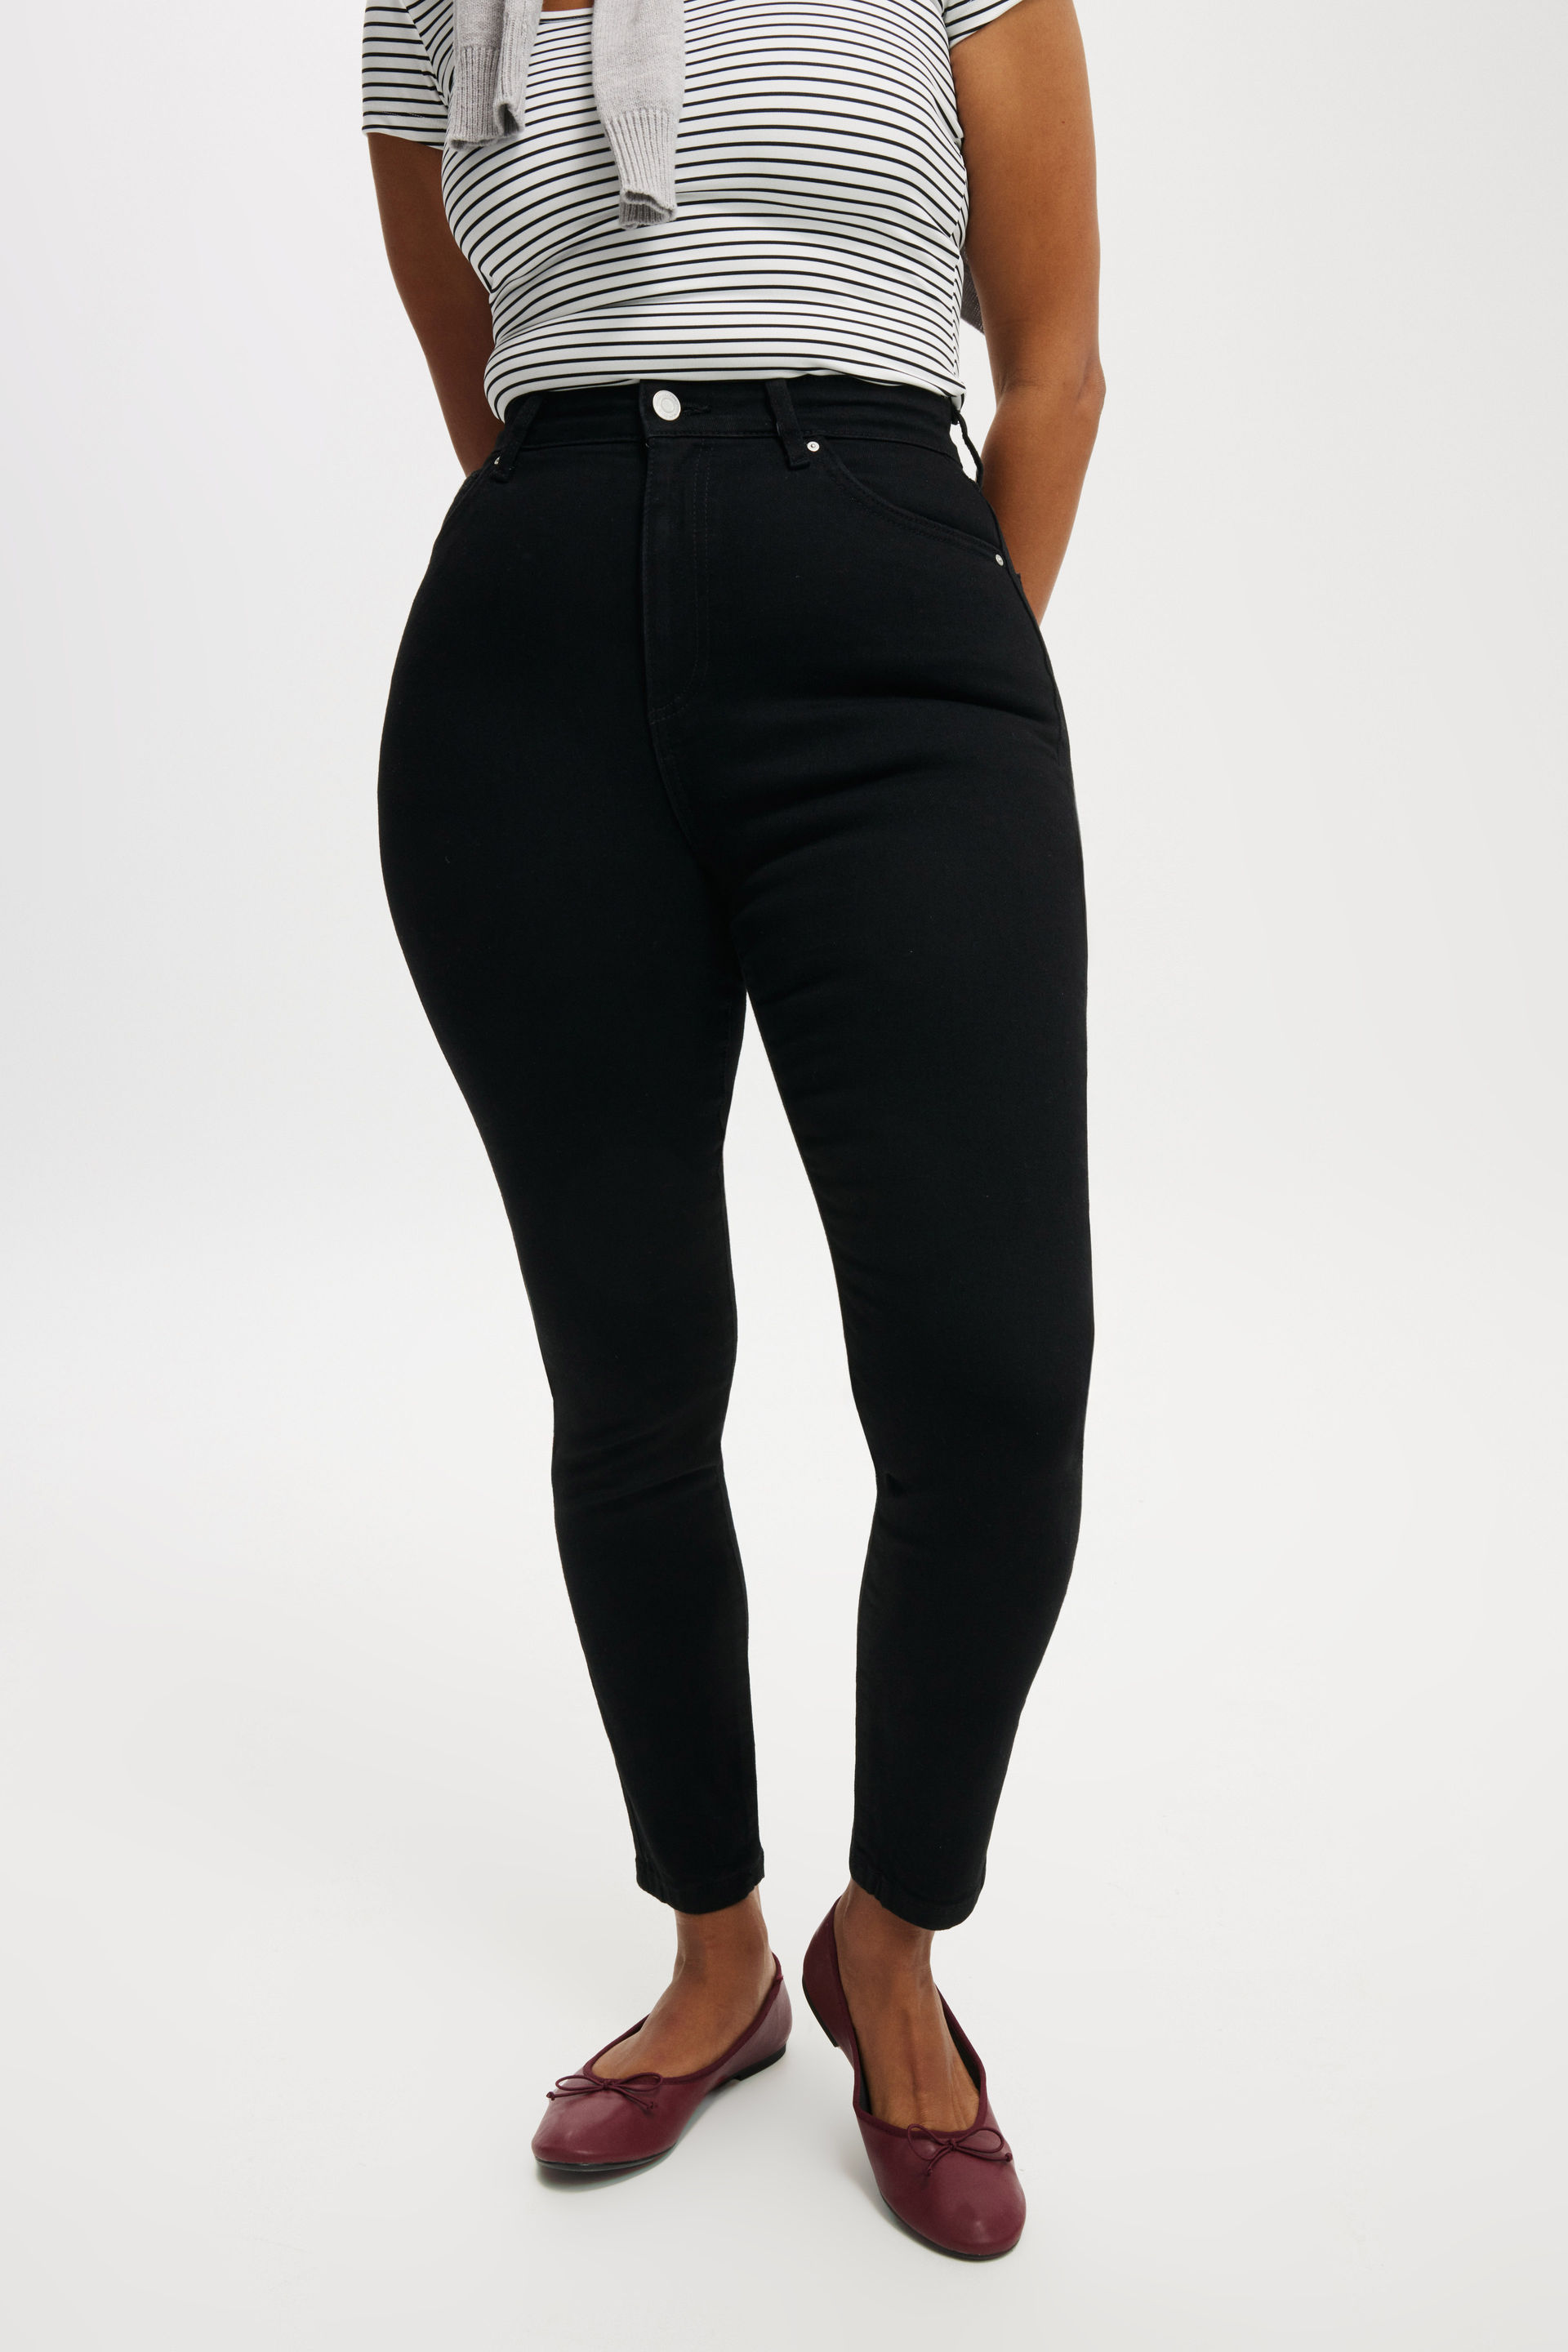 Cotvotee High Waist Jeans for Women Fashion Stretch Skinny Black